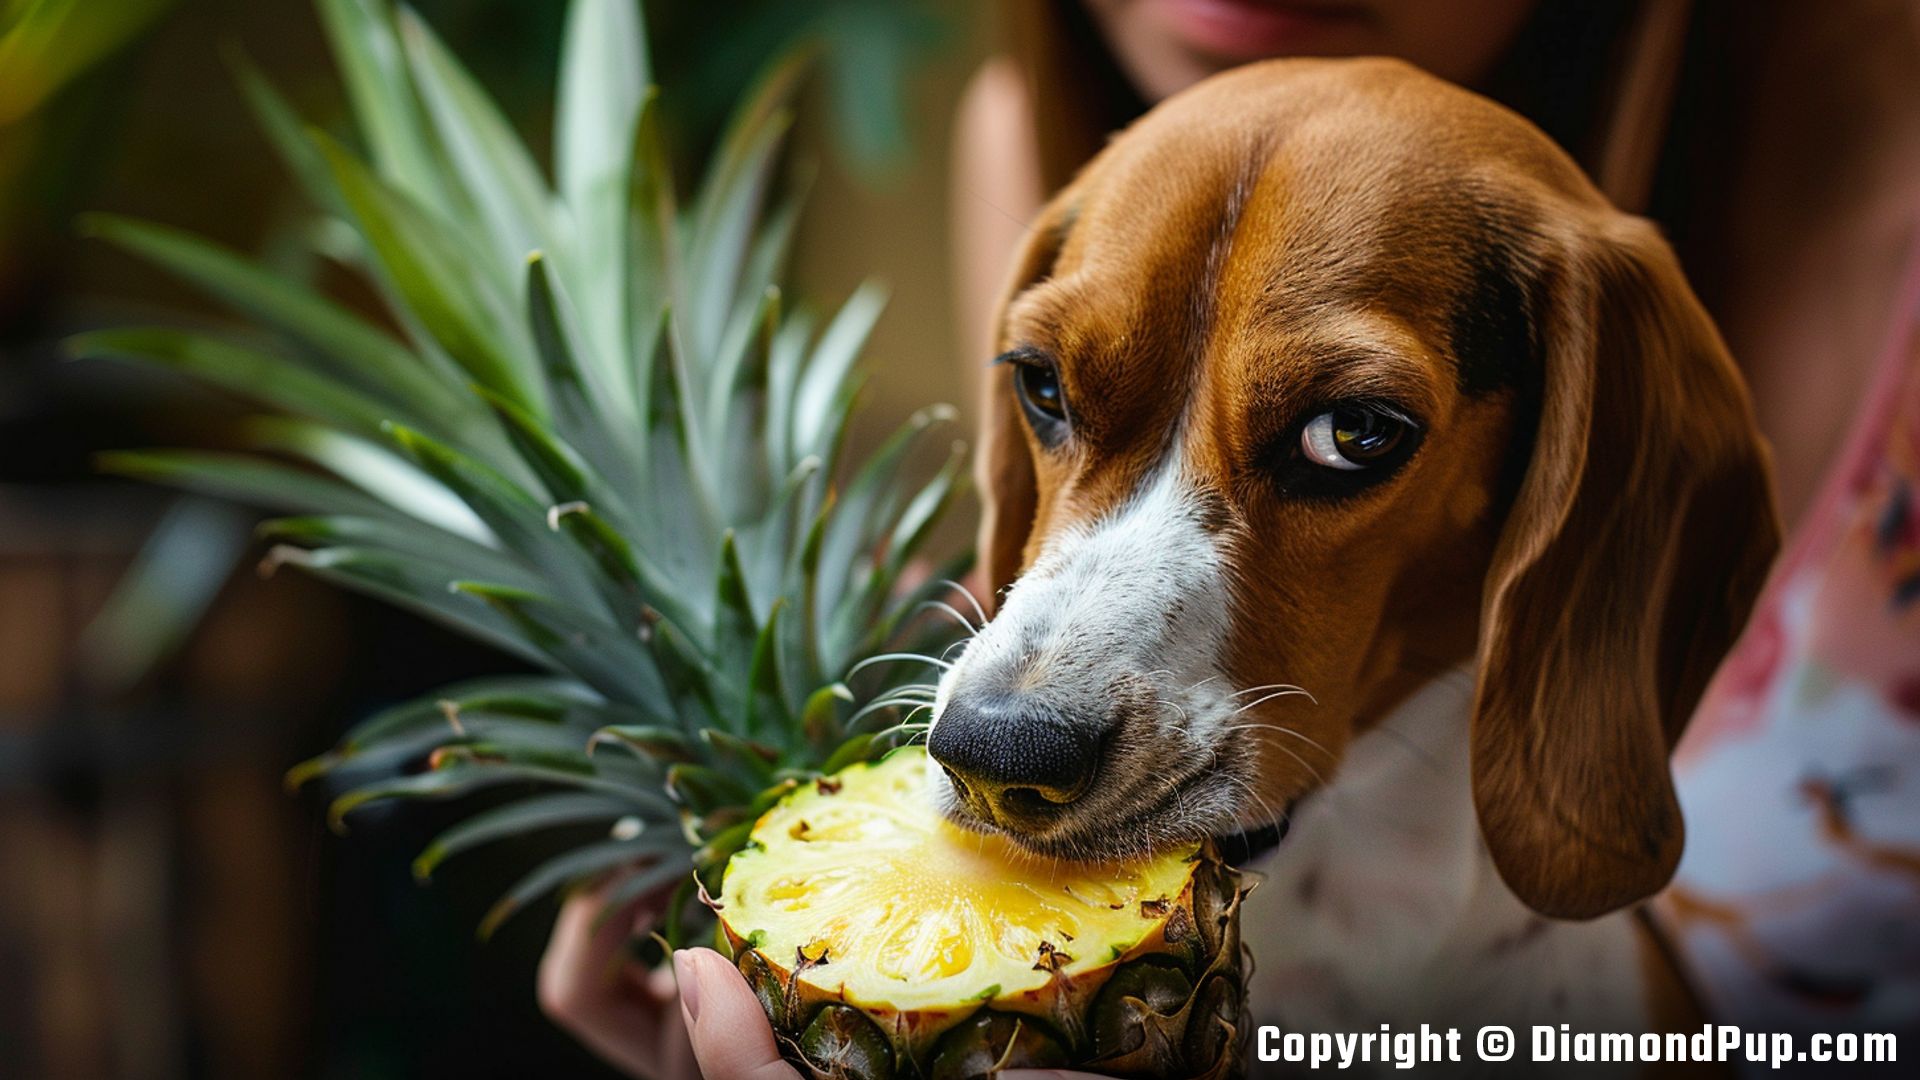 Photograph of an Adorable Beagle Snacking on Pineapple